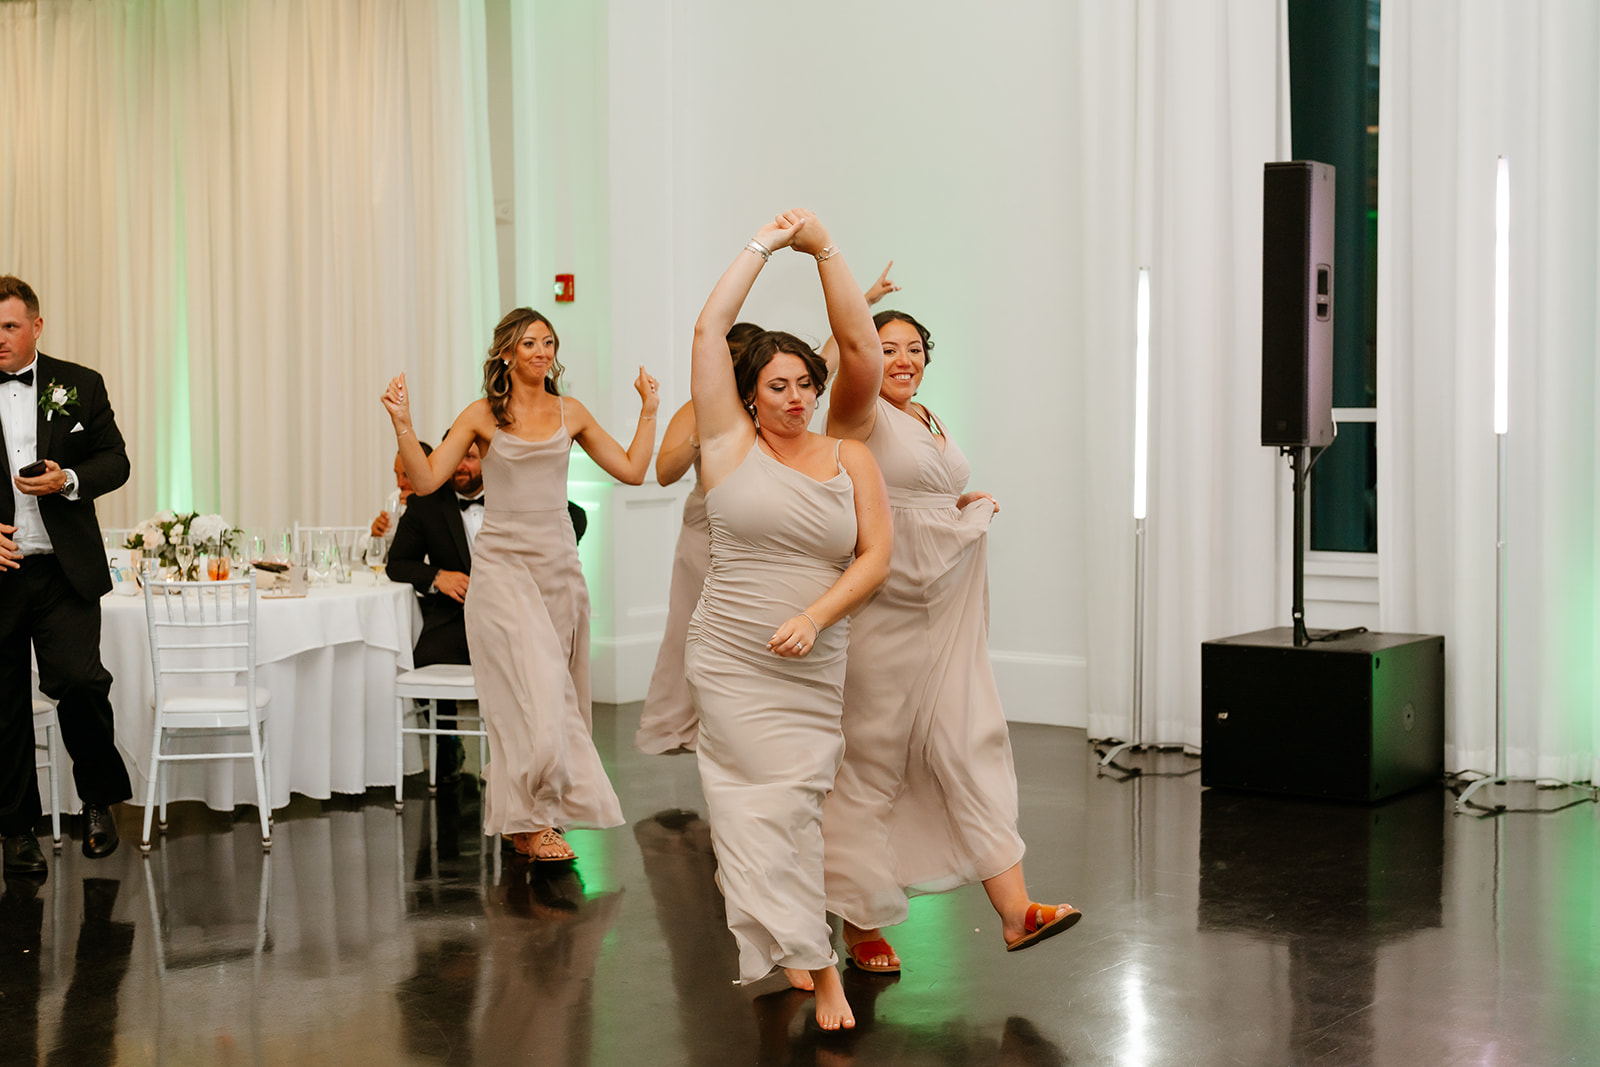 Three women in elegant dresses dancing and having fun at a wedding reception, with a man visible in the background.